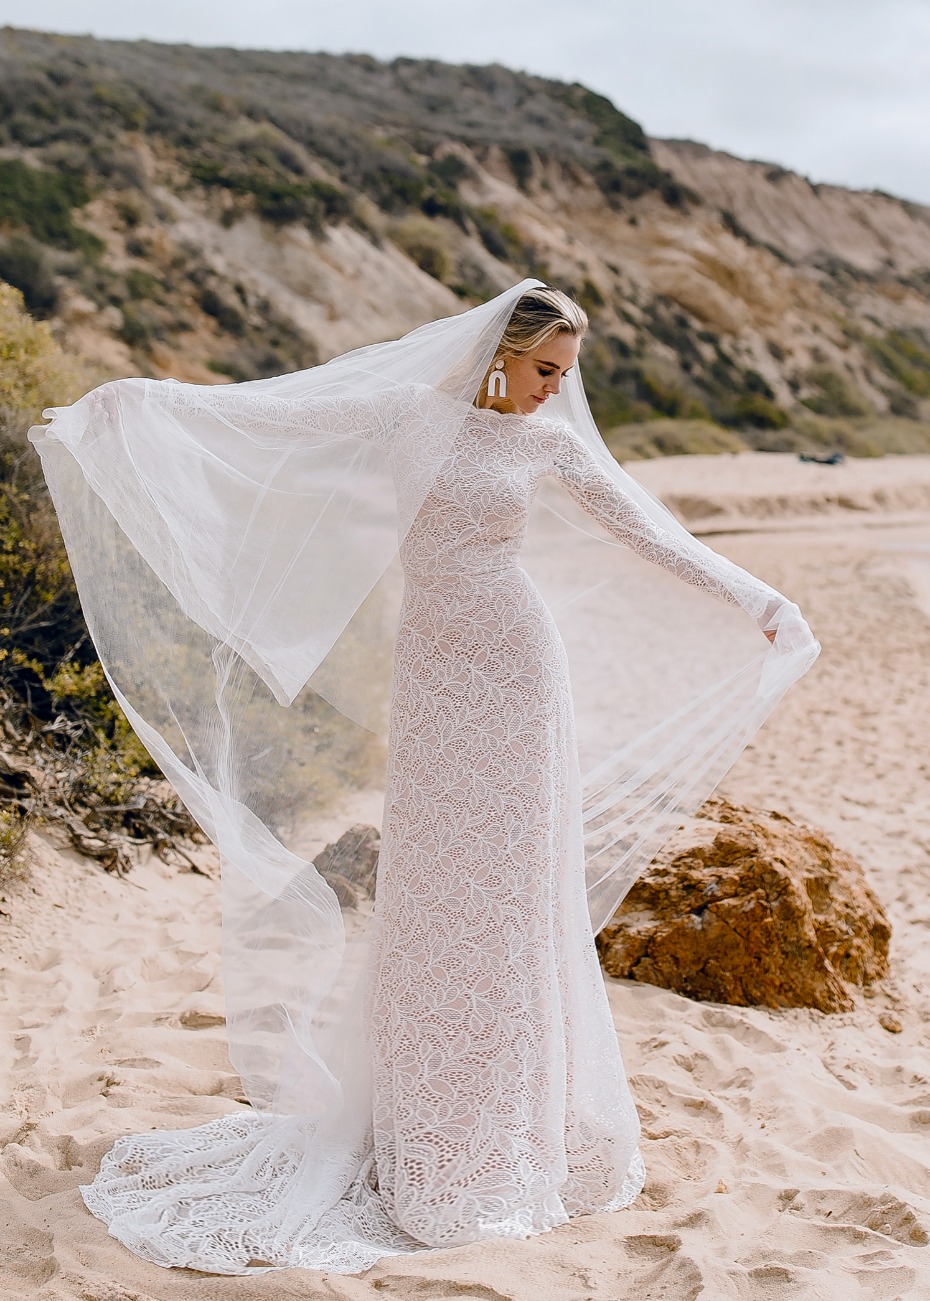 Wear Your Love Has a New Bridal Collection and Youâre Going to âGrowâ Crazy Over It